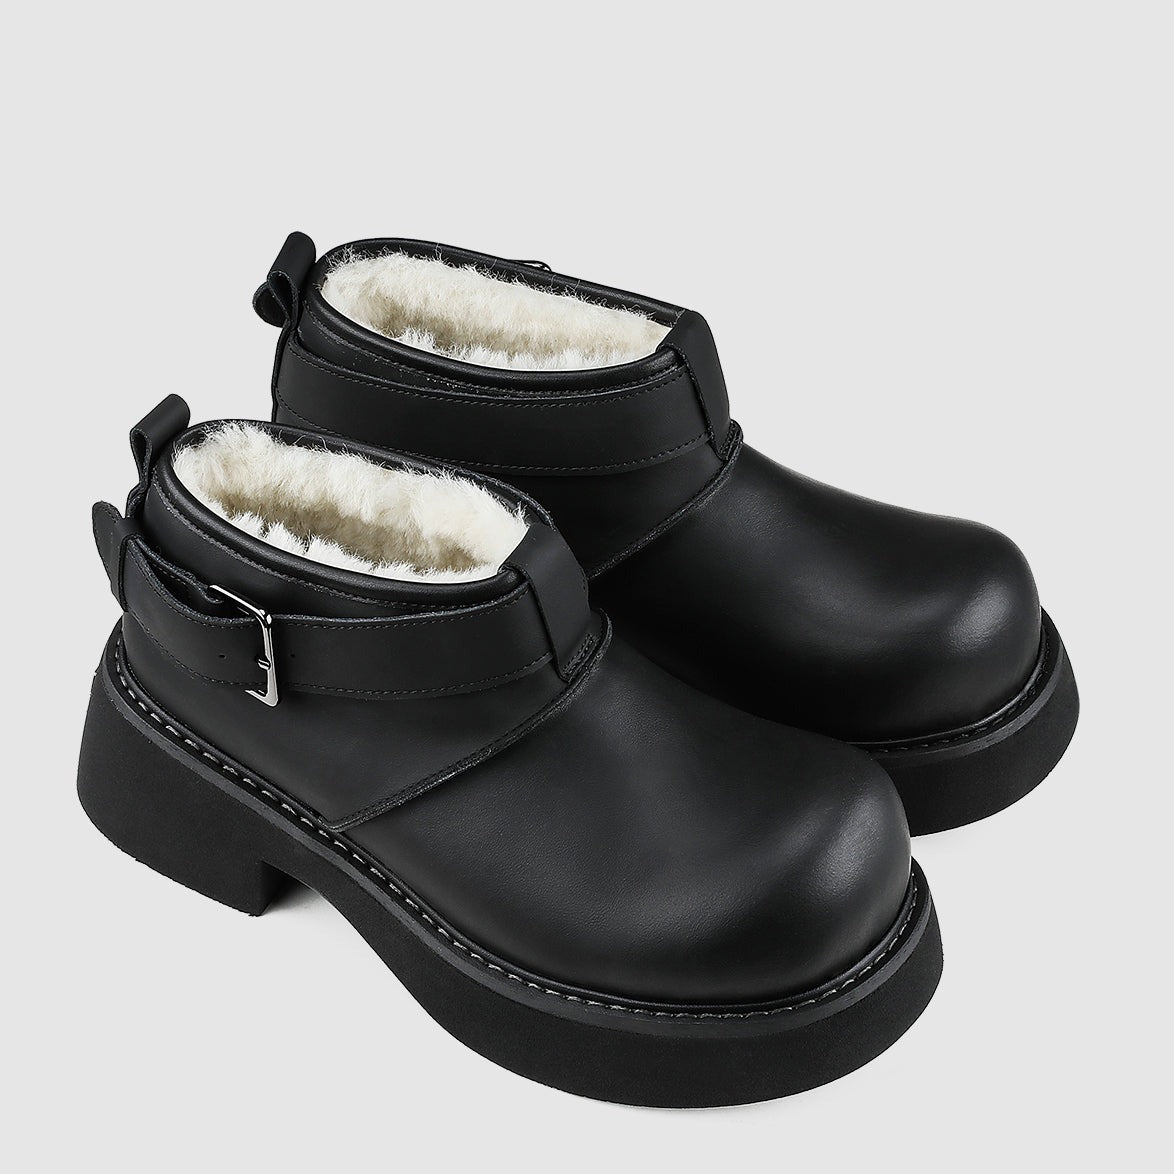 Fashionable and Warm Thick-soled Snow Boots